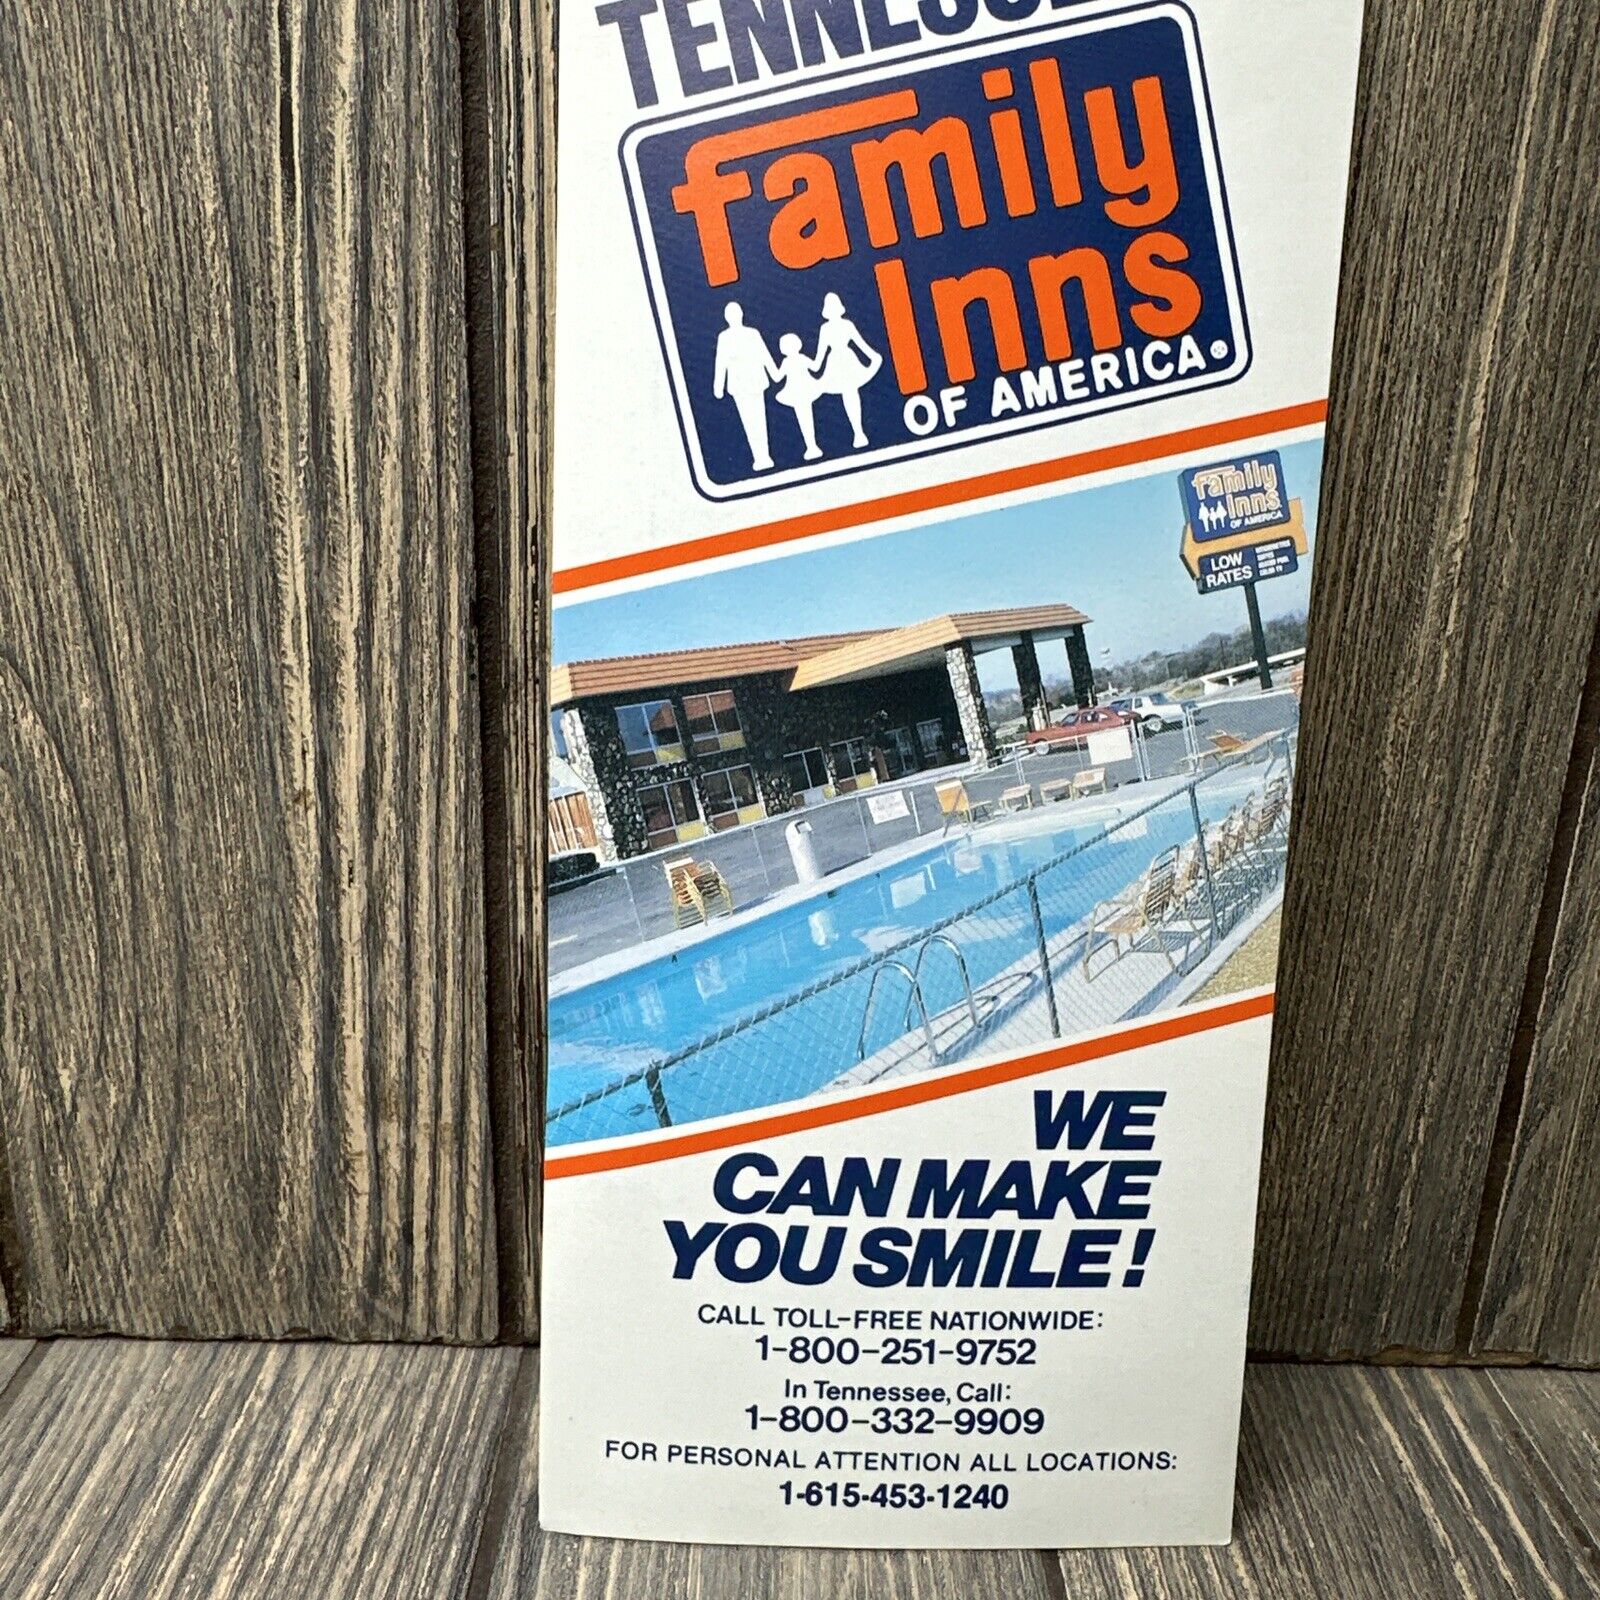 Vintage Tennessee Family Inn's of America Pigeon Forge Brochure